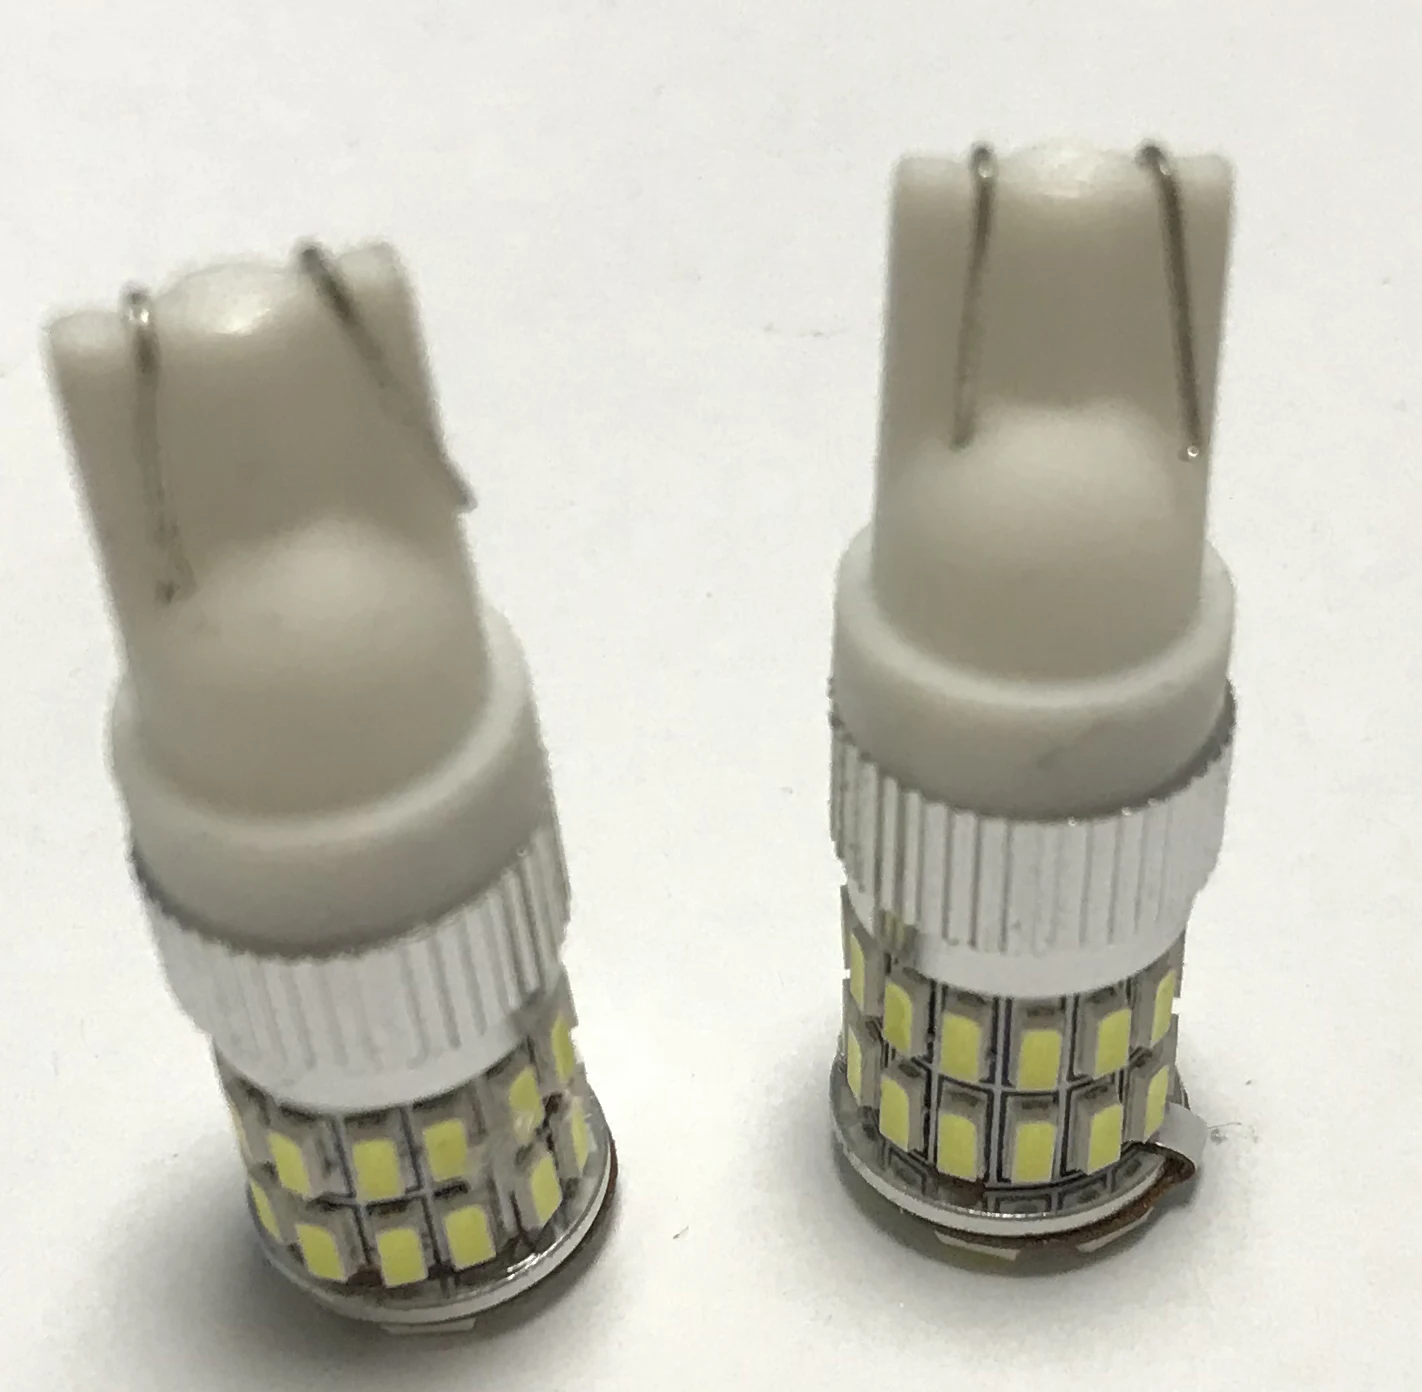 Wholesale led car interior lamp light T10 36smd 3014 chips use in car lighting system super bright